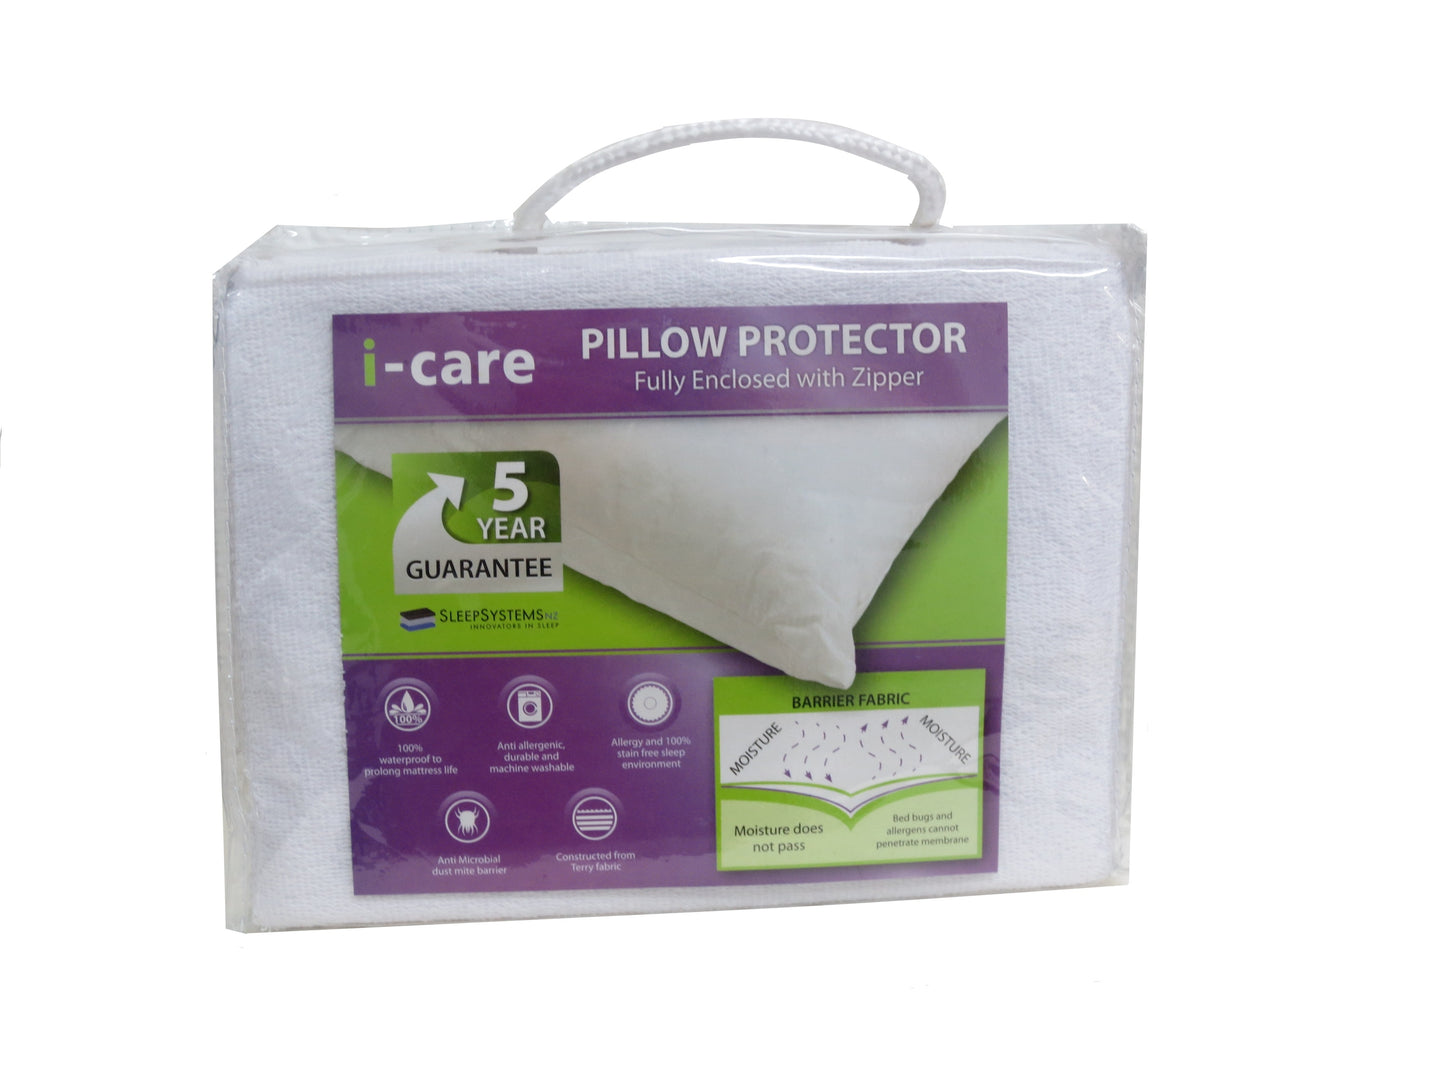 ICare Pillow Protector